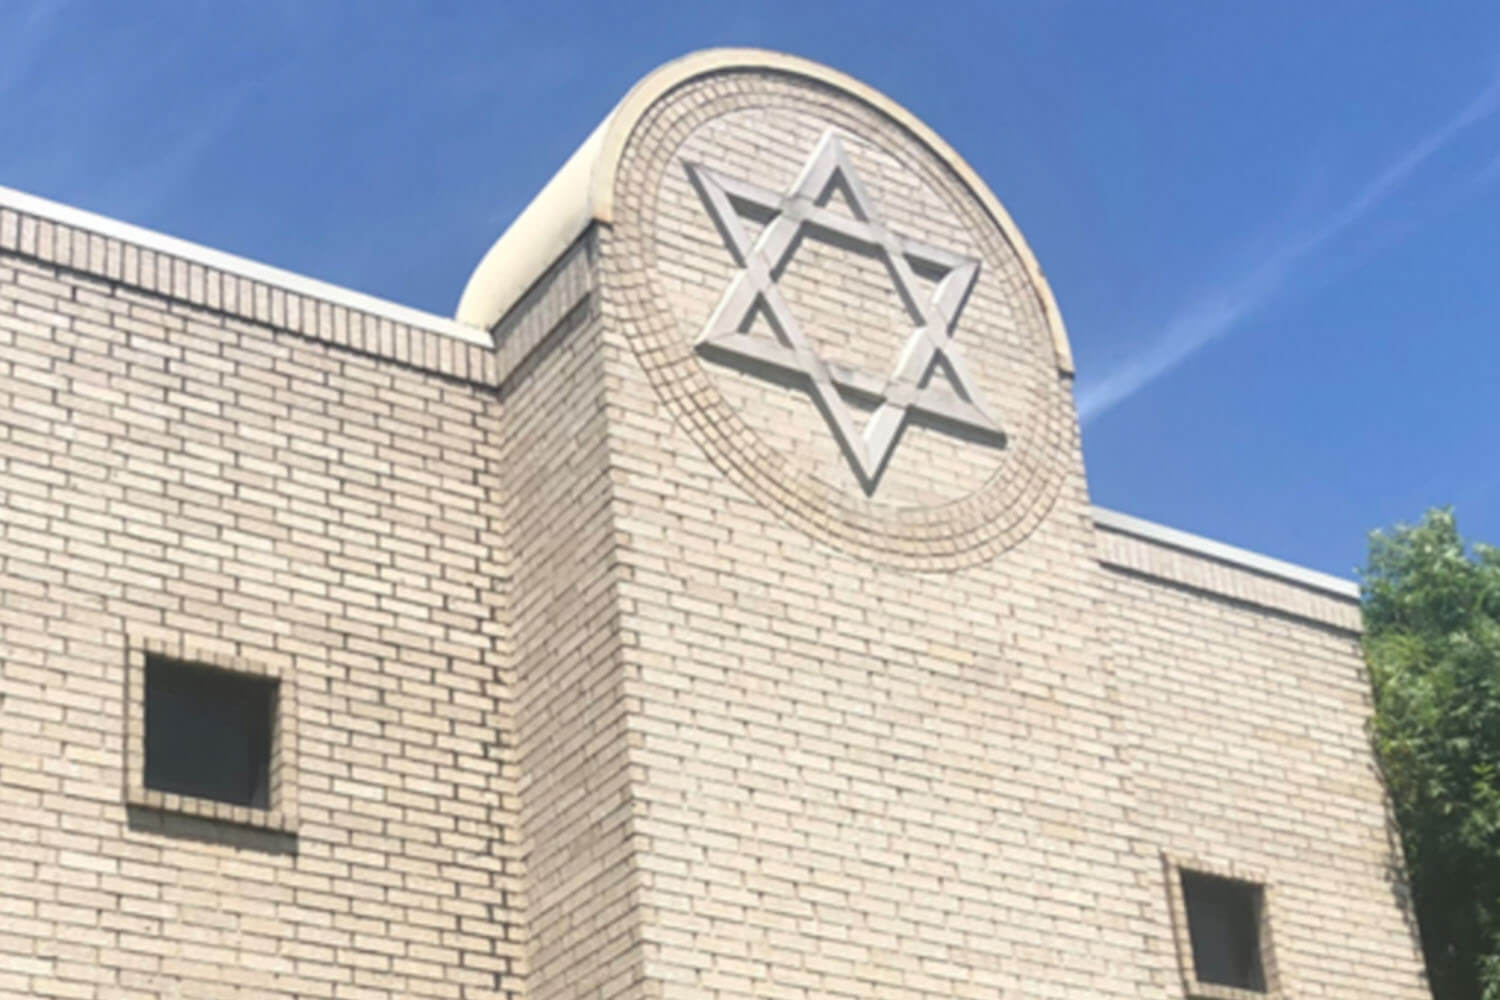 The wall of a synagogue with the star of David on it